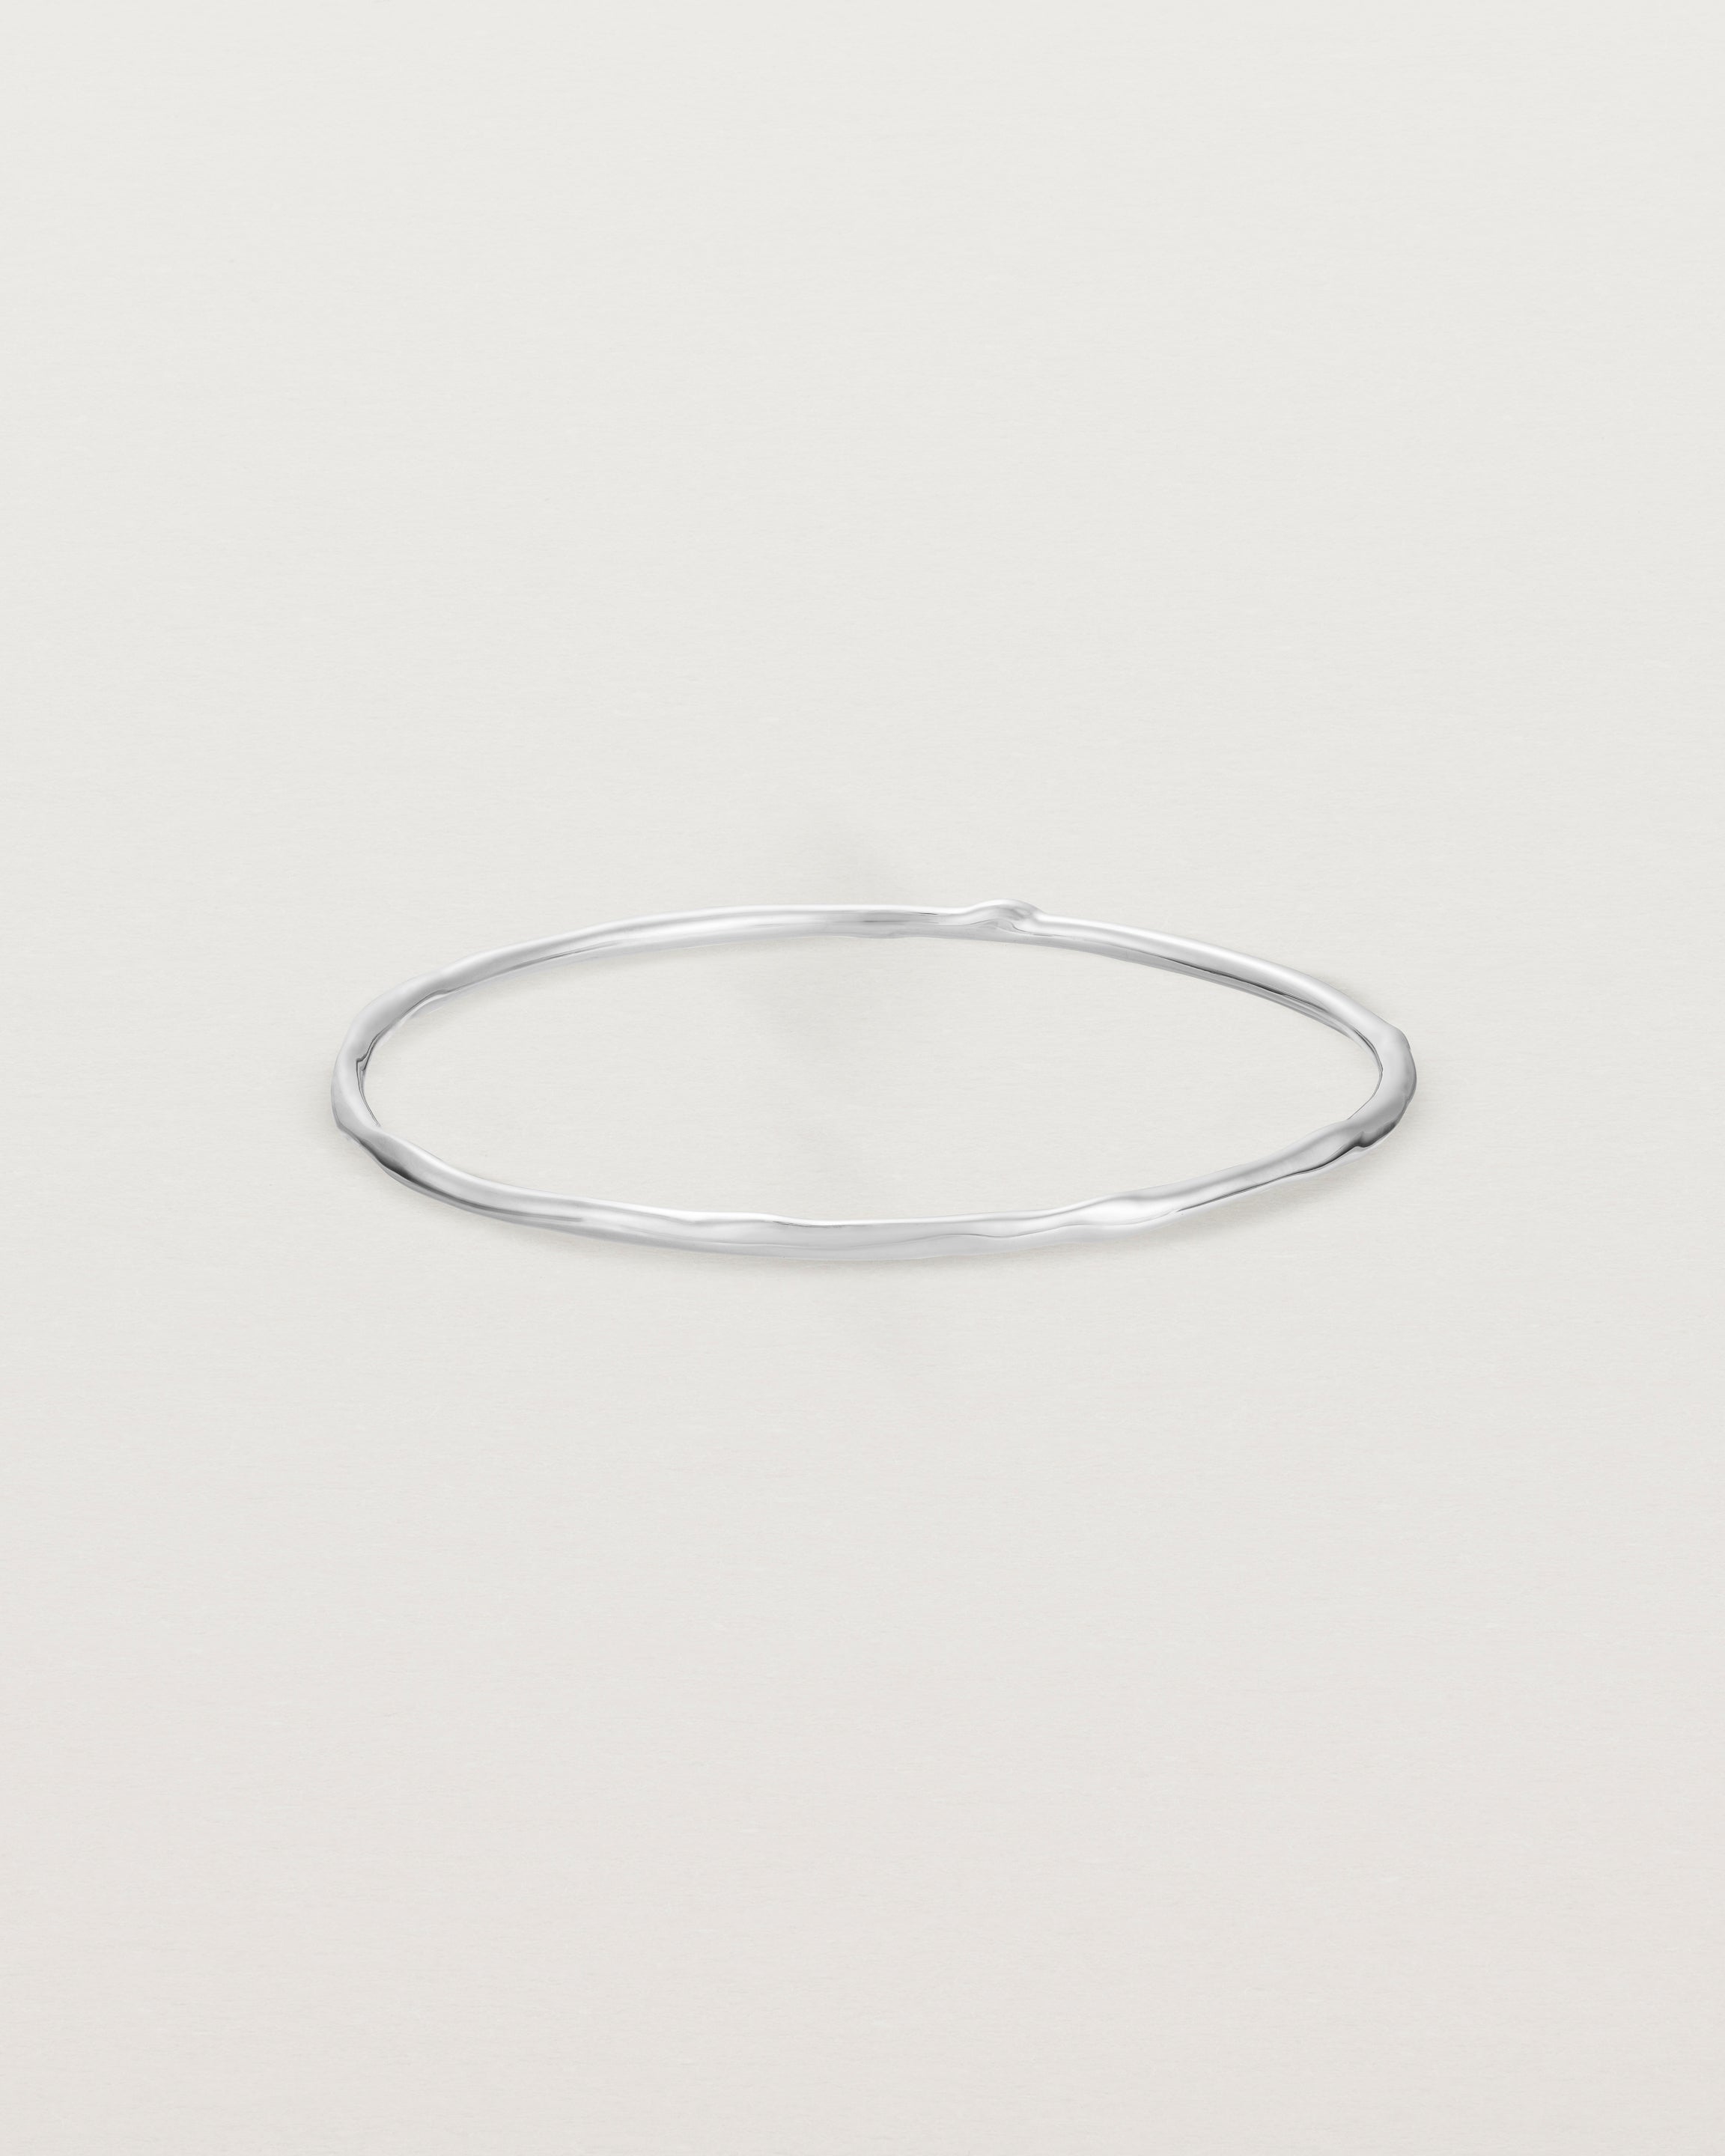 Front view of the Organic Bangle | Sterling Silver.